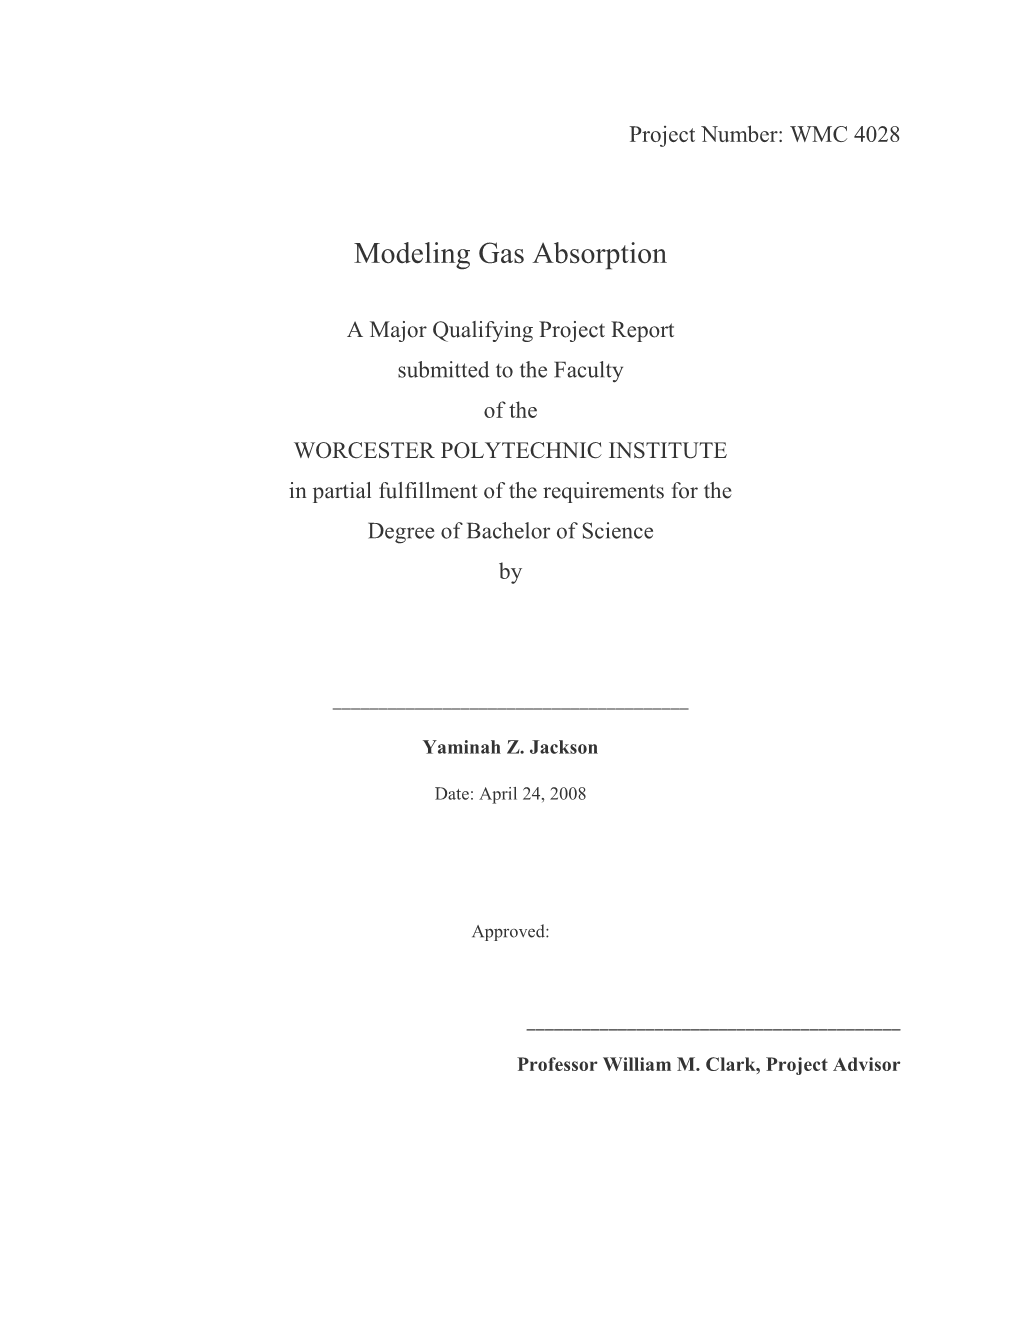 Modeling Gas Absorption